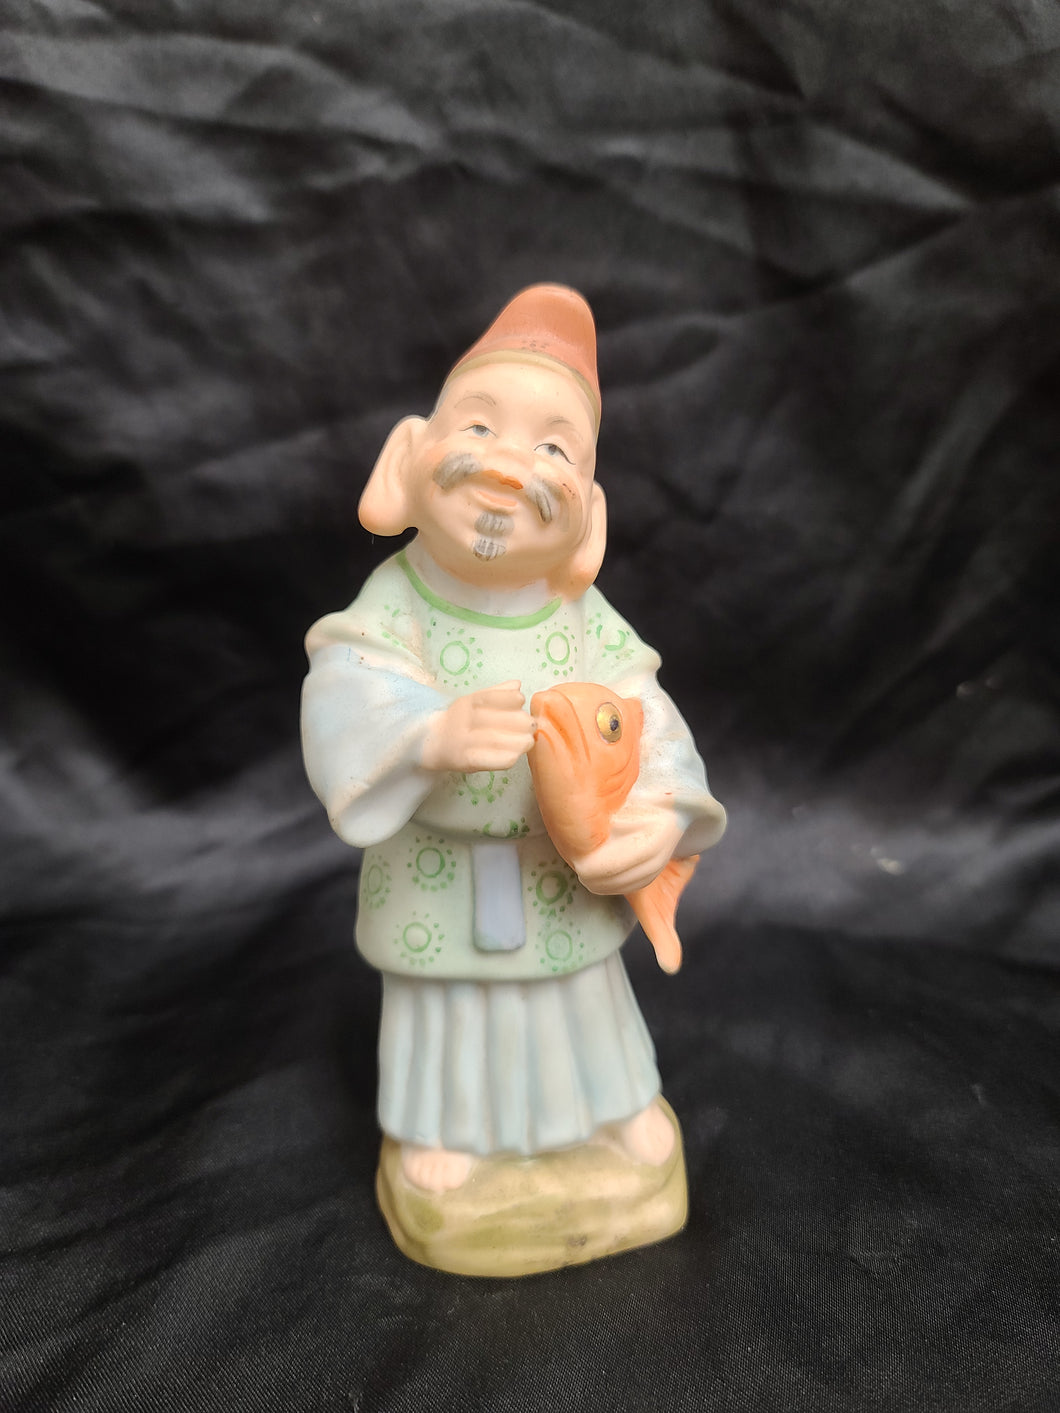 Vintage Asian Fisherman Figurine Good condition no chips or cracks Size 6.5